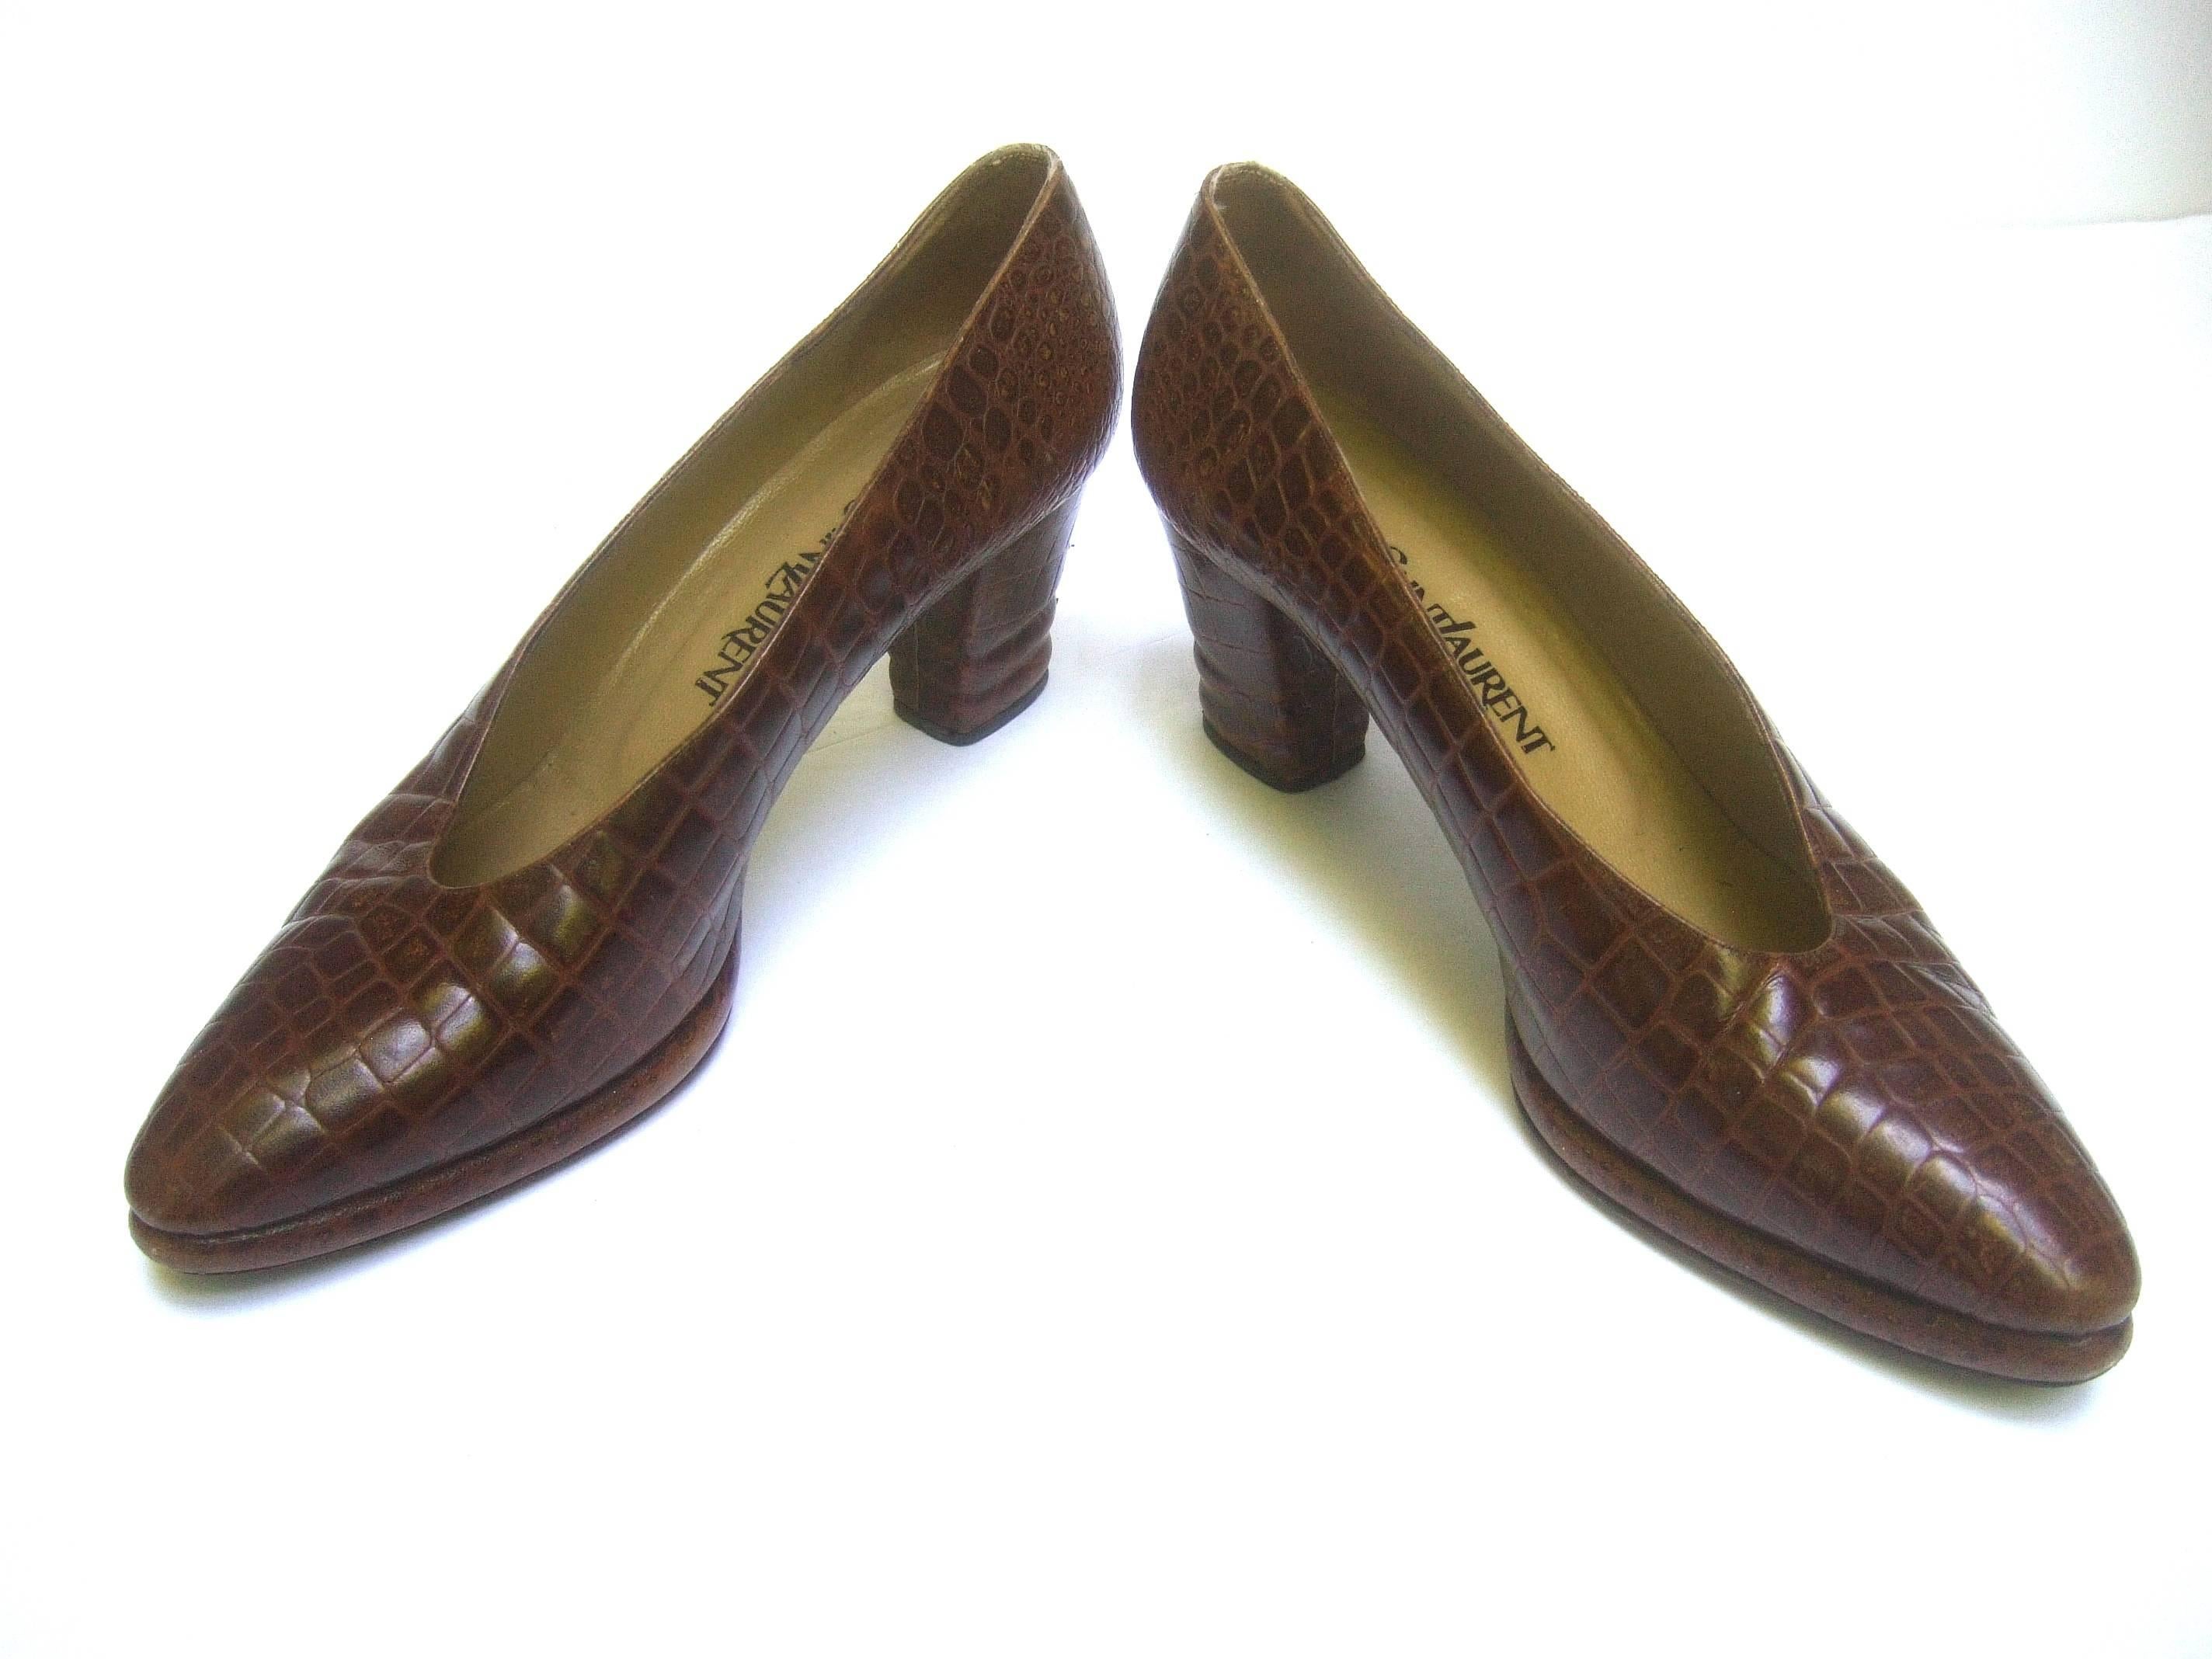 Yves Saint Laurent Italian Embossed Brown Leather Pumps US Size 7.5 M 1